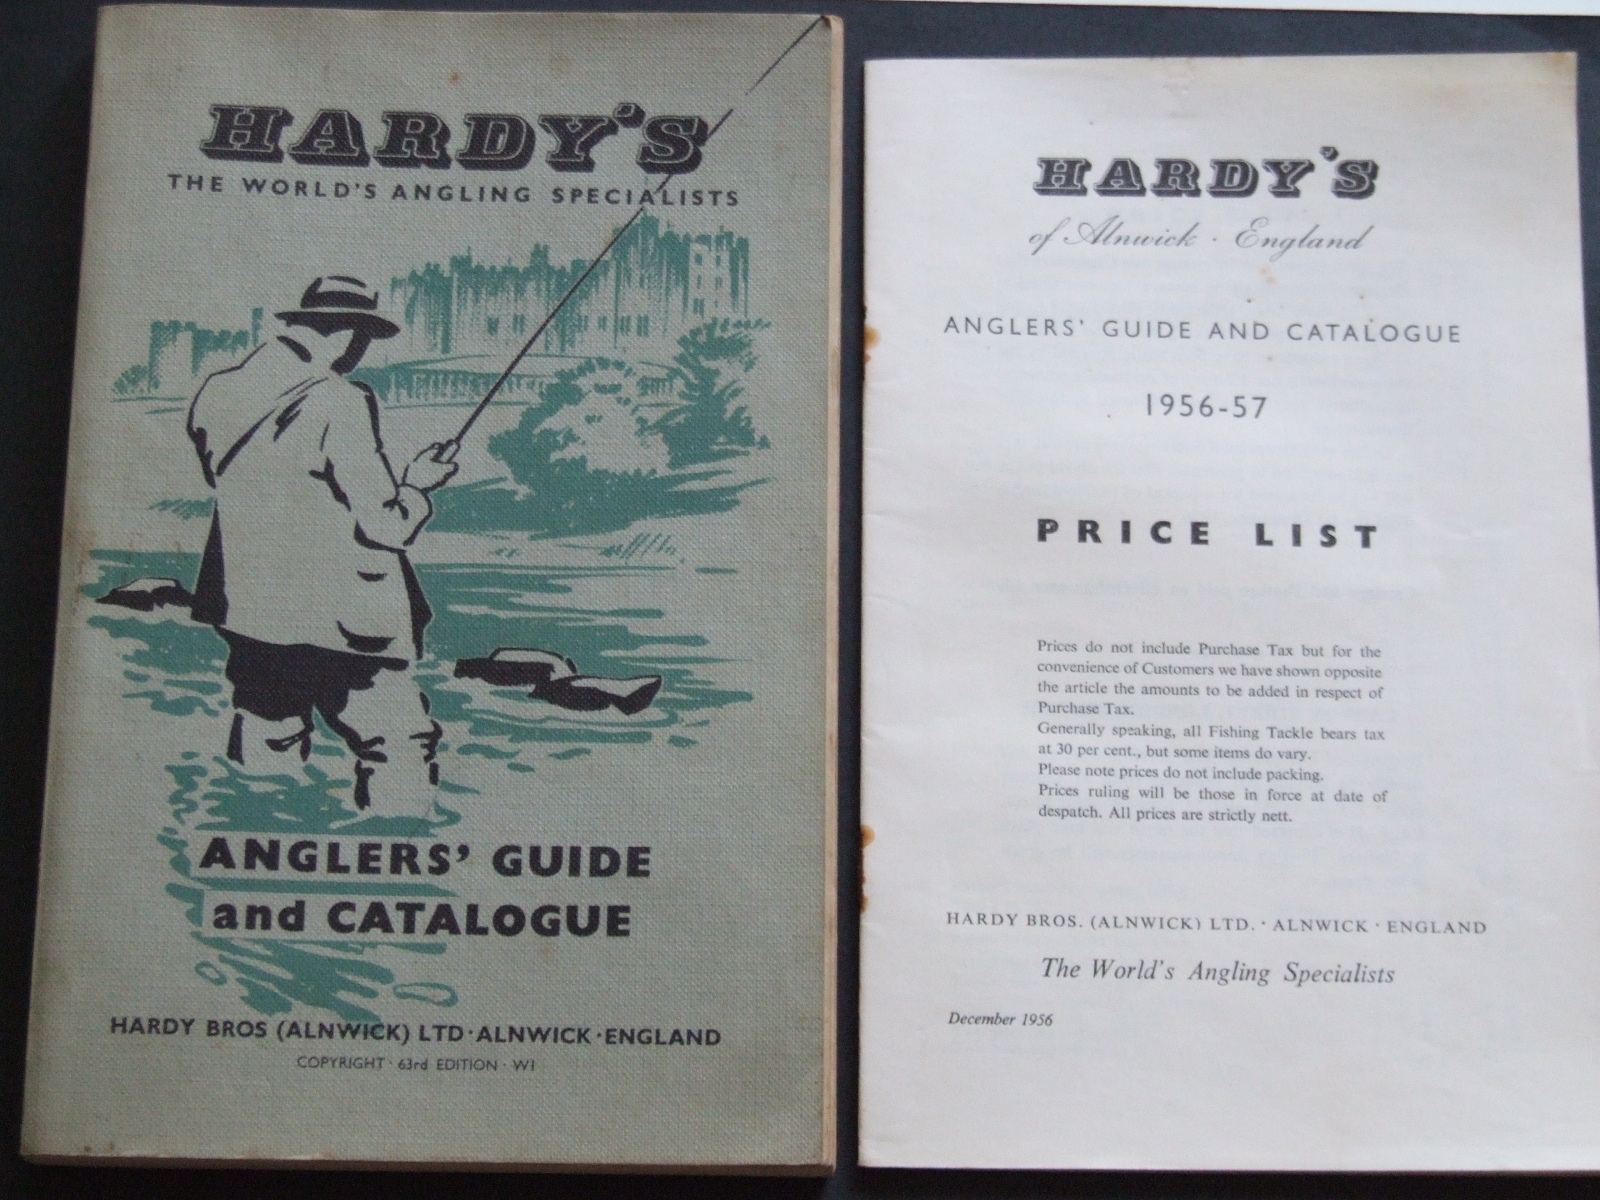 FLY FISHING. HARDY'S ANGLERS GUIDE - CORONATION NUMBER 1937 - INCREDIBLY  WELL FEEDING FISHING CATALOG ILLUSTRATED WITH BL. A. 23 COLORED PLATES.  Books, Maps & Manuscripts - Books - Auctionet